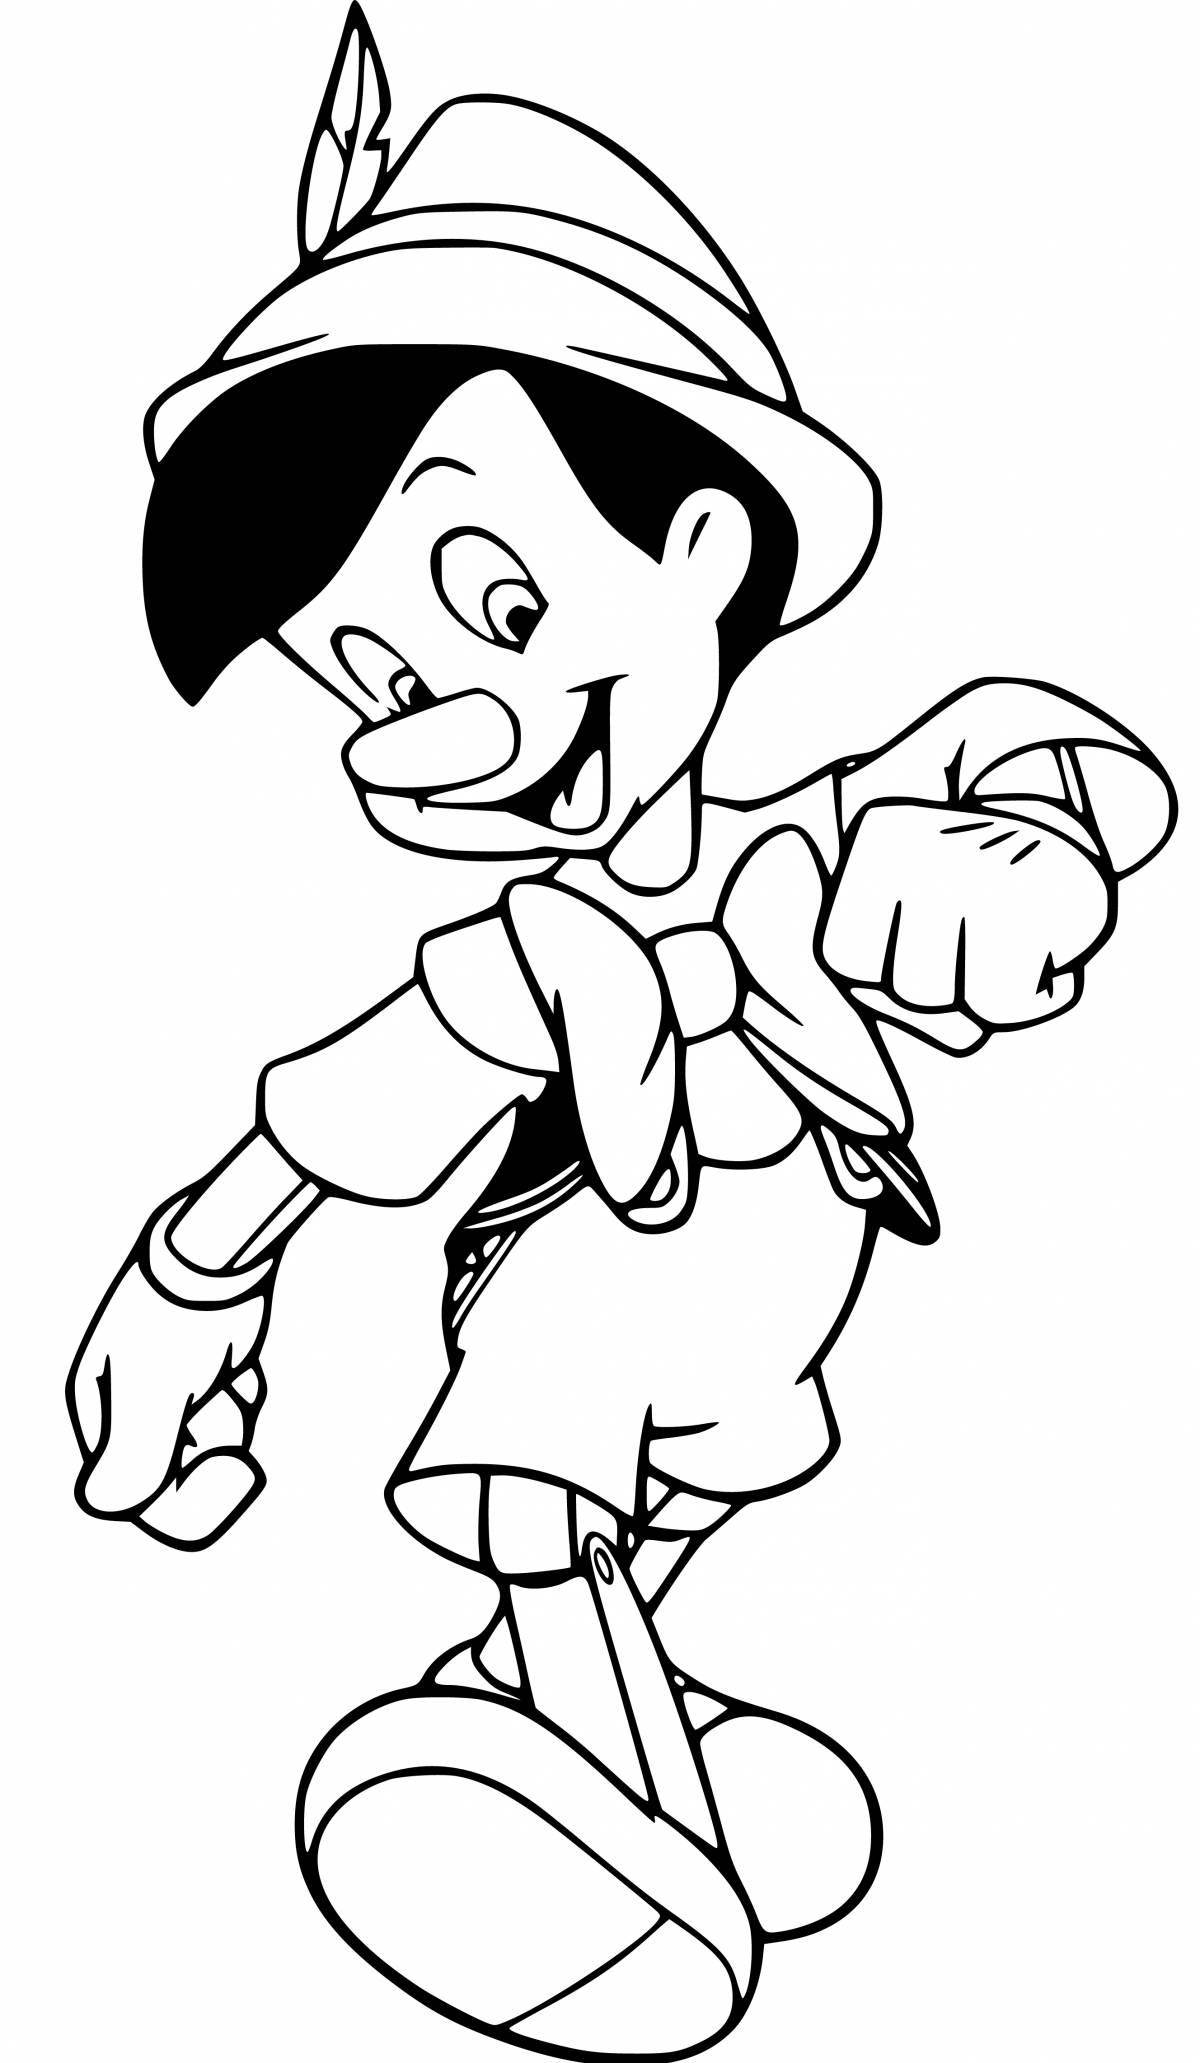 Cute pinocchio coloring pages for kids